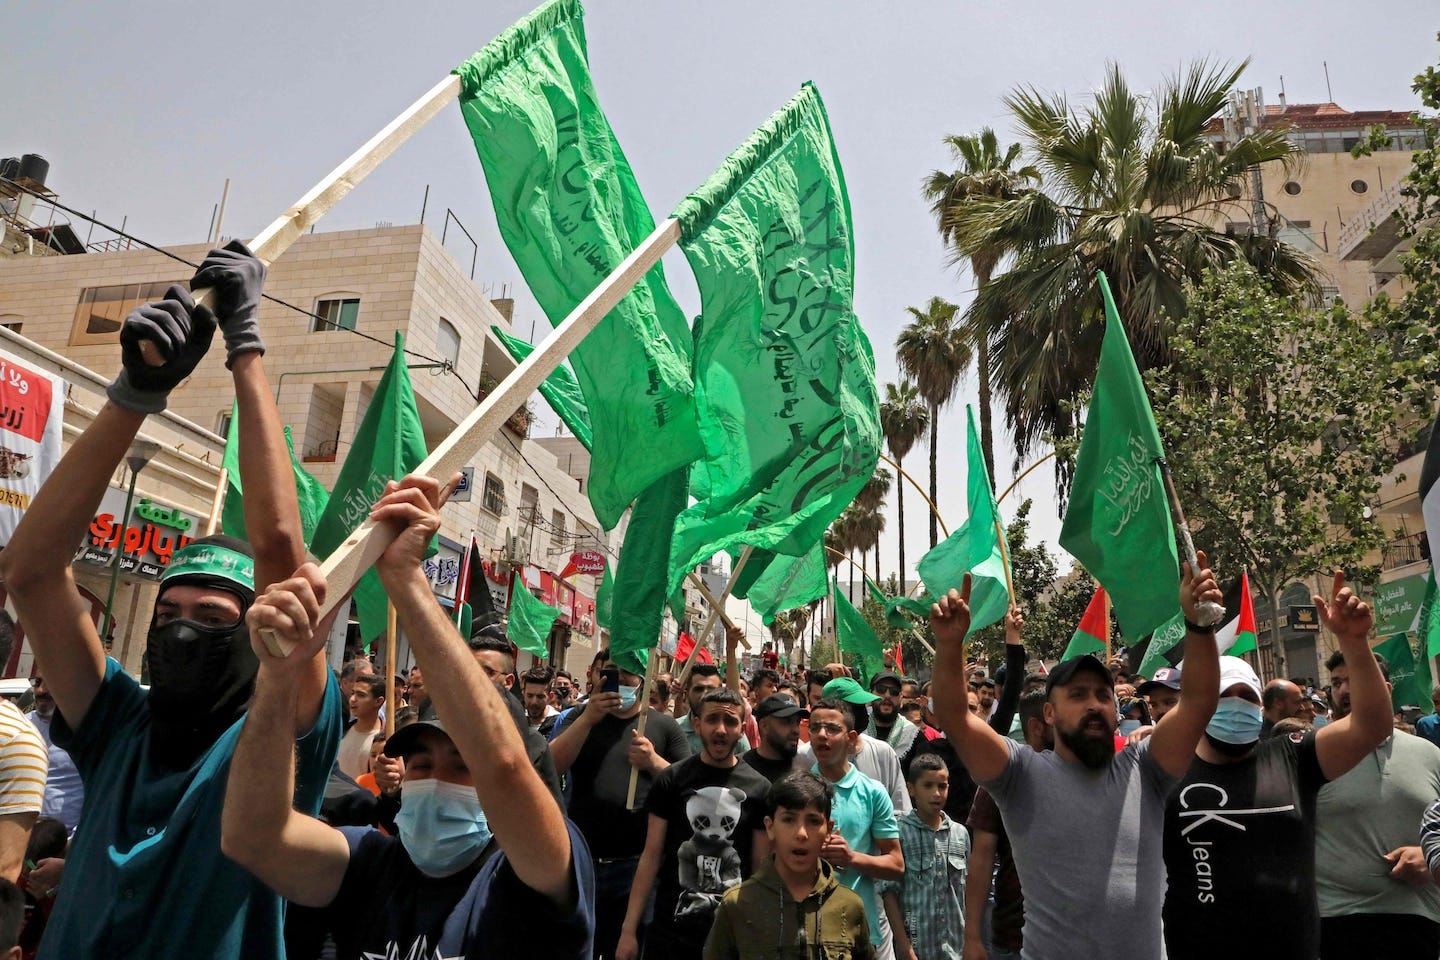 Hamas wins Palestinian support in West Bank after Israel hostilities ...